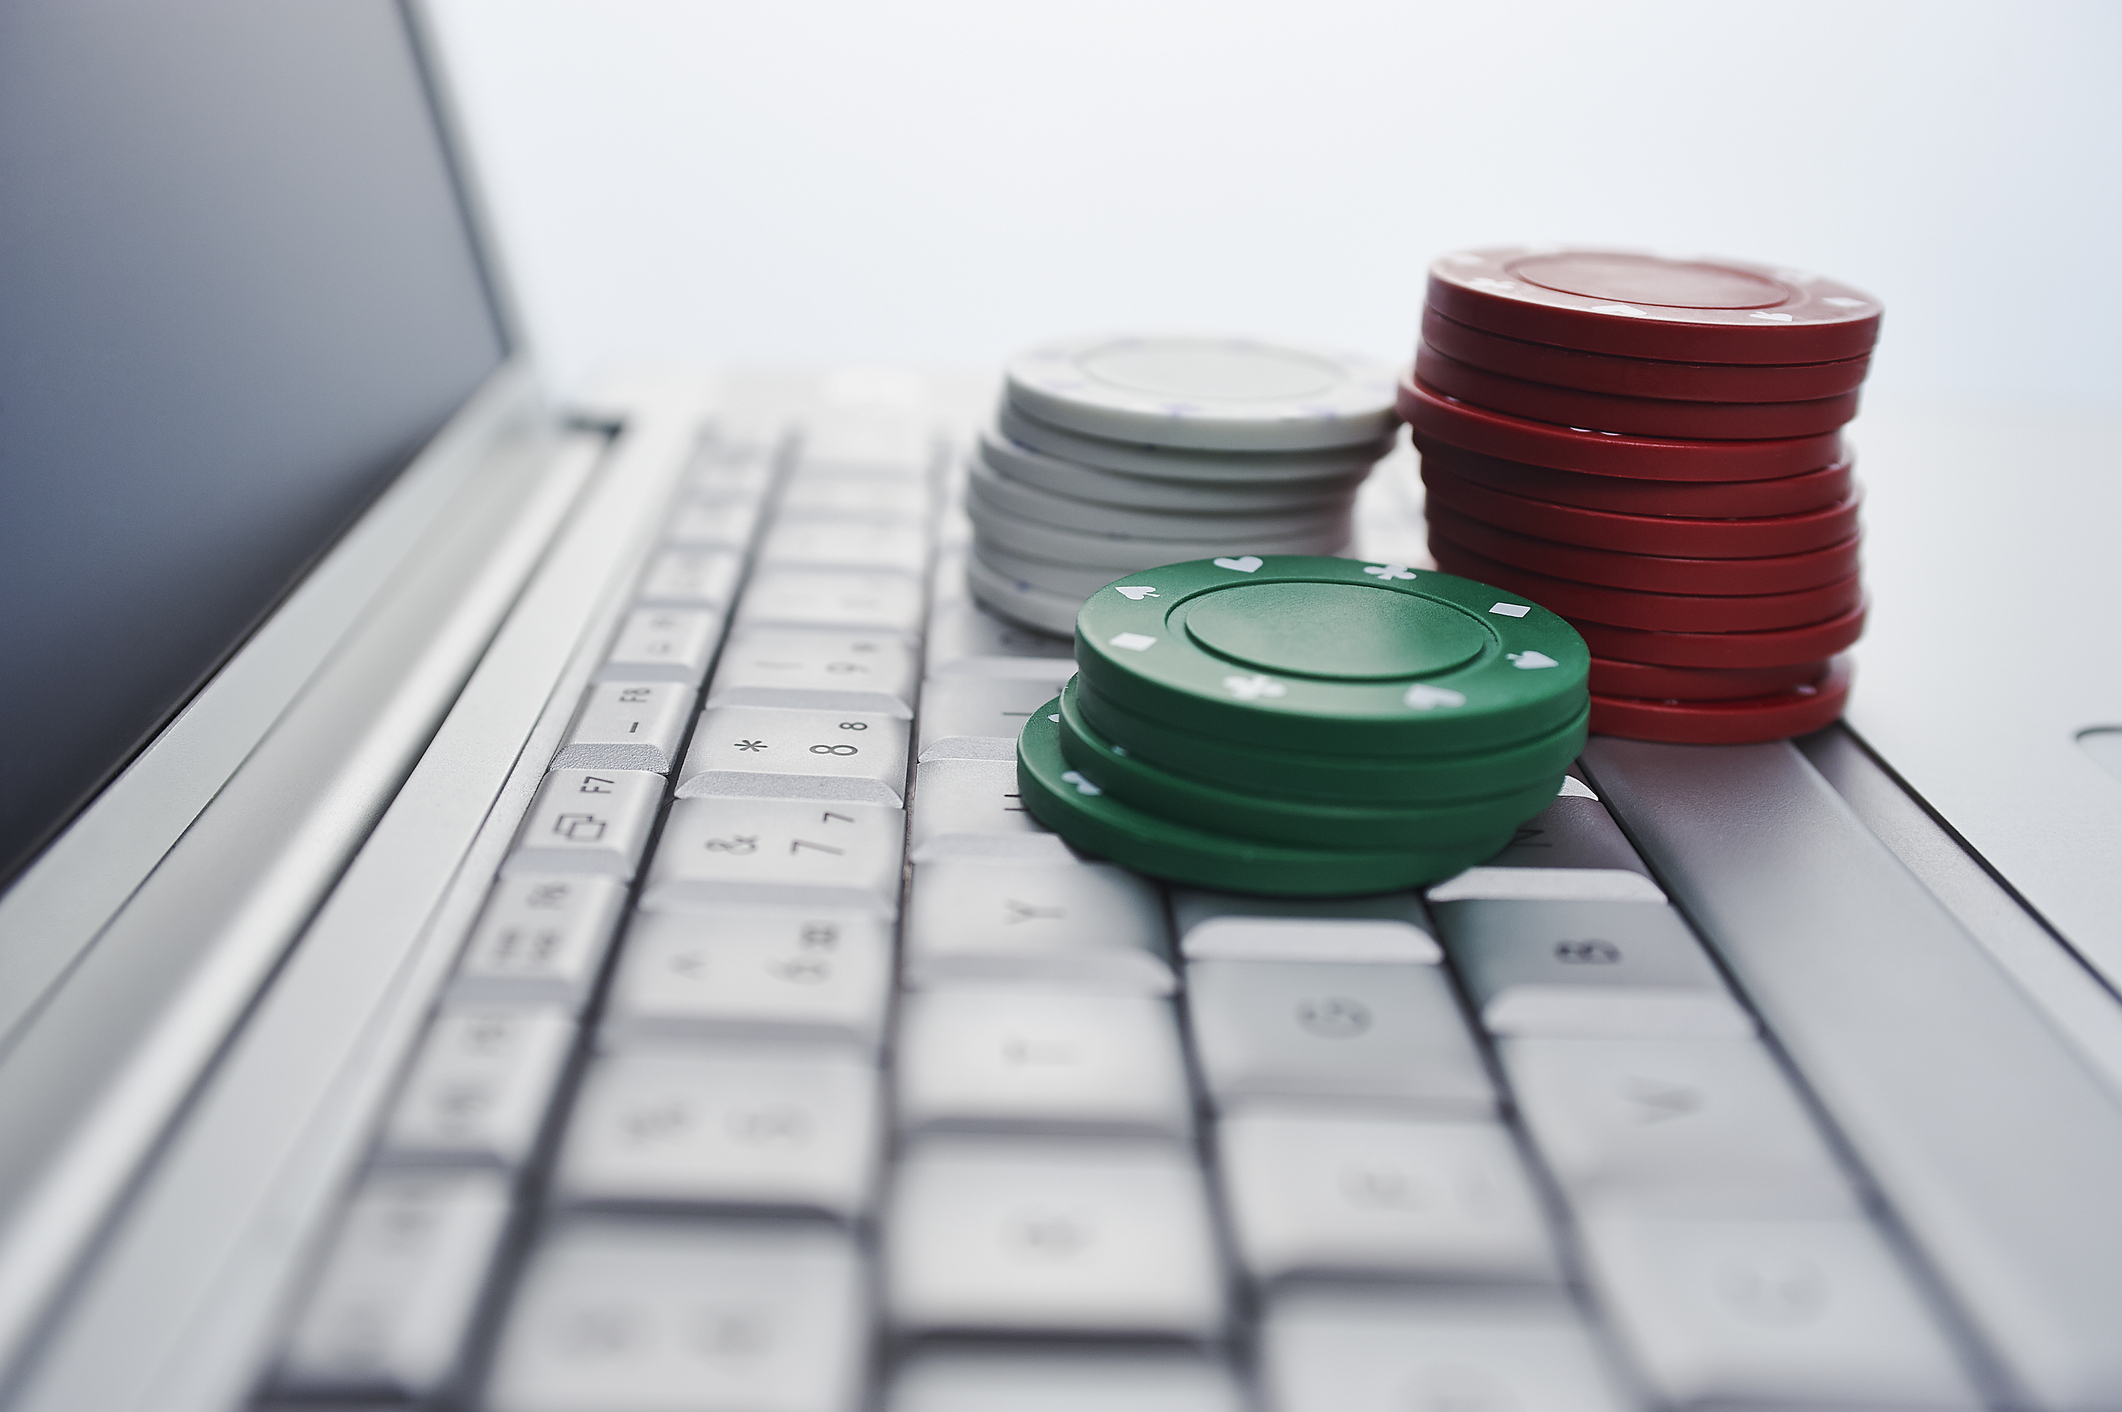 Three small stacks of betting chips are piled on a laptop keyboard